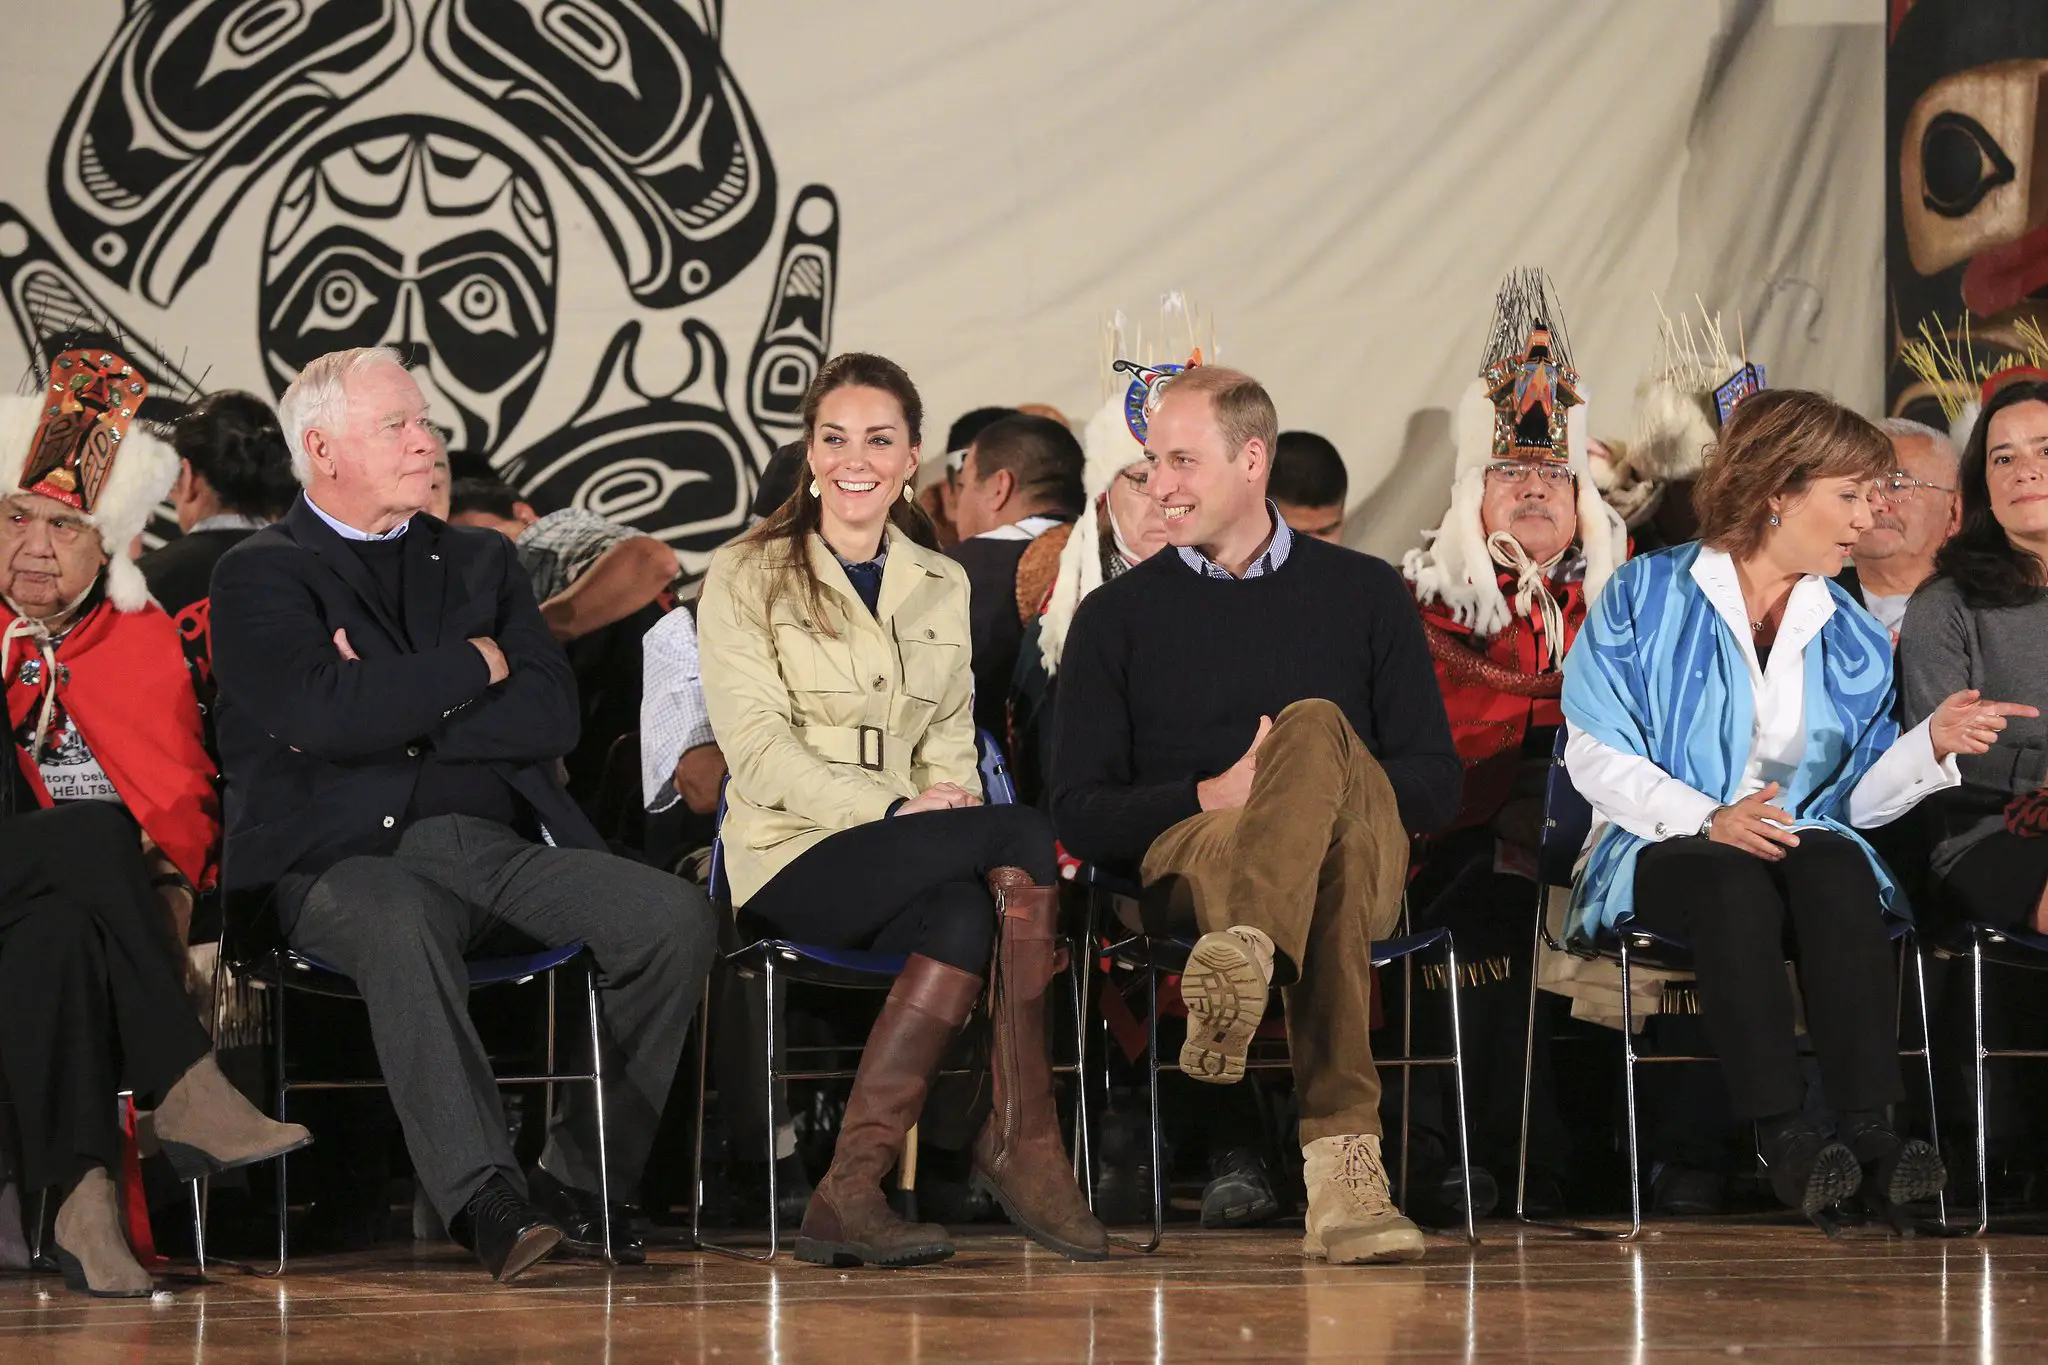 The Duke and Duchess of Cambridge enjoyed a dance performance in Bella